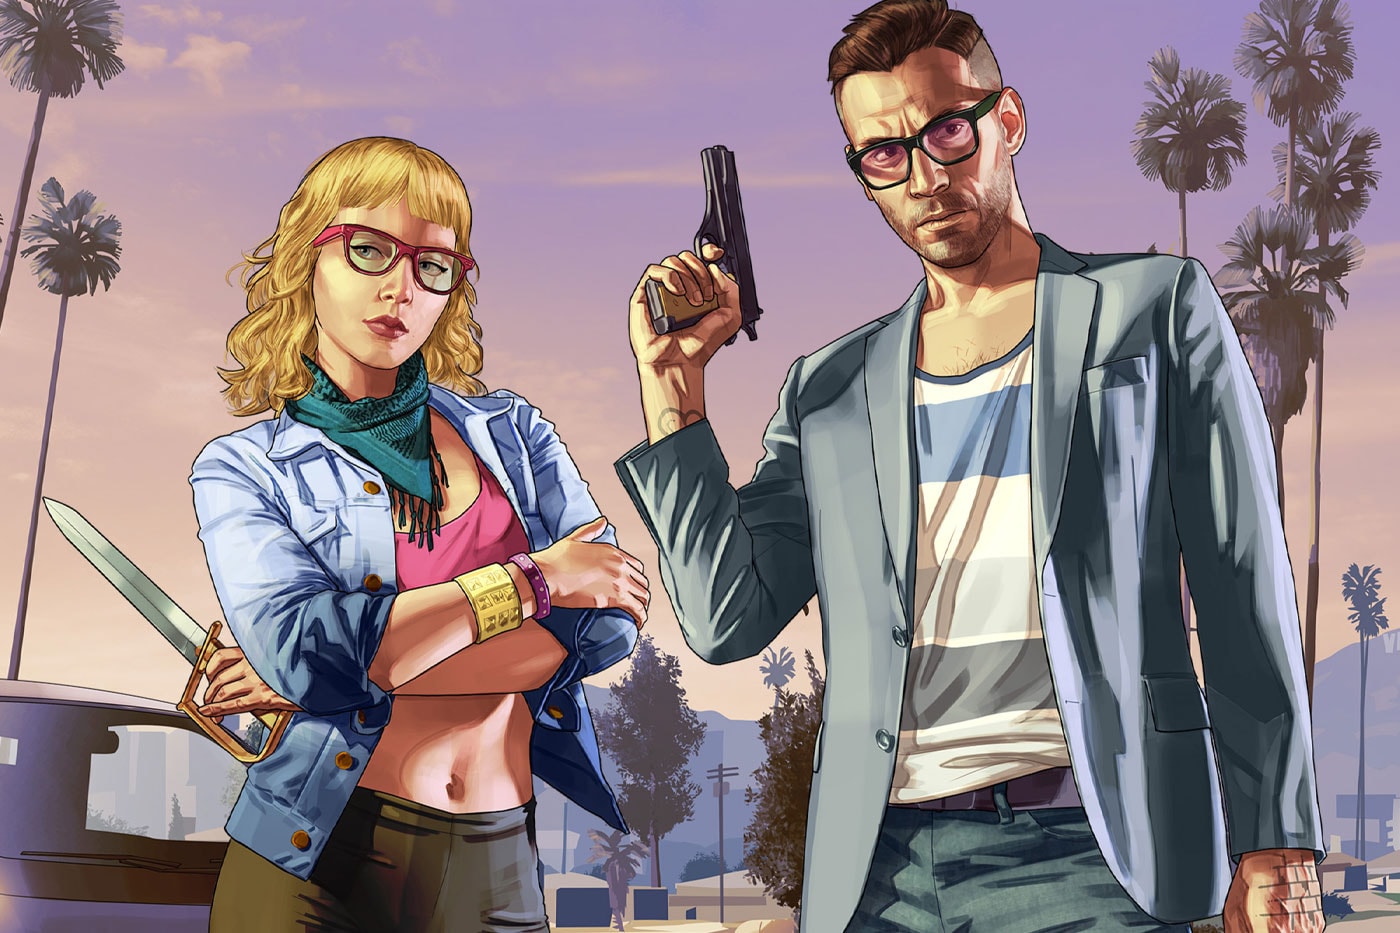 Take-Two Interactive CEO Strauss Zelnick Gives GTA VI development Update